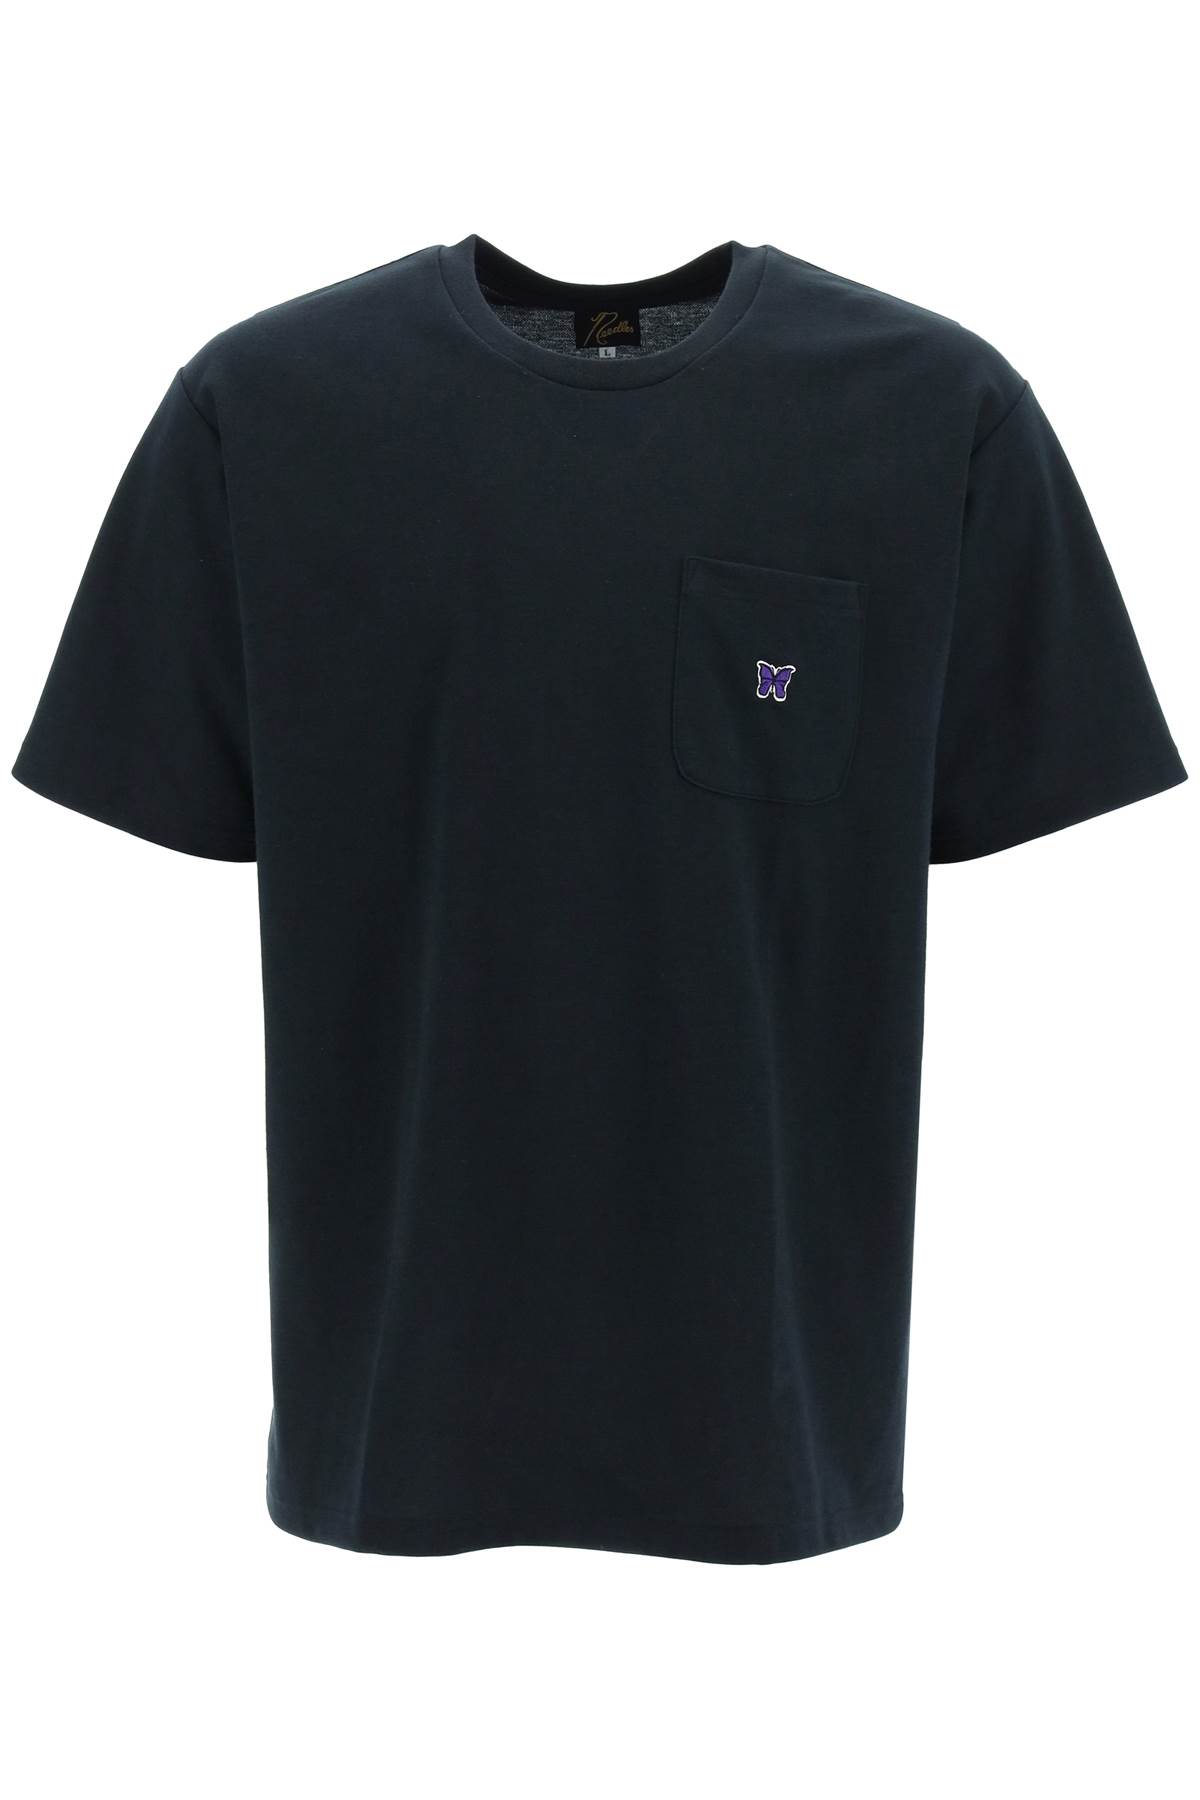 Needles Embroidered Pocket T-shirt